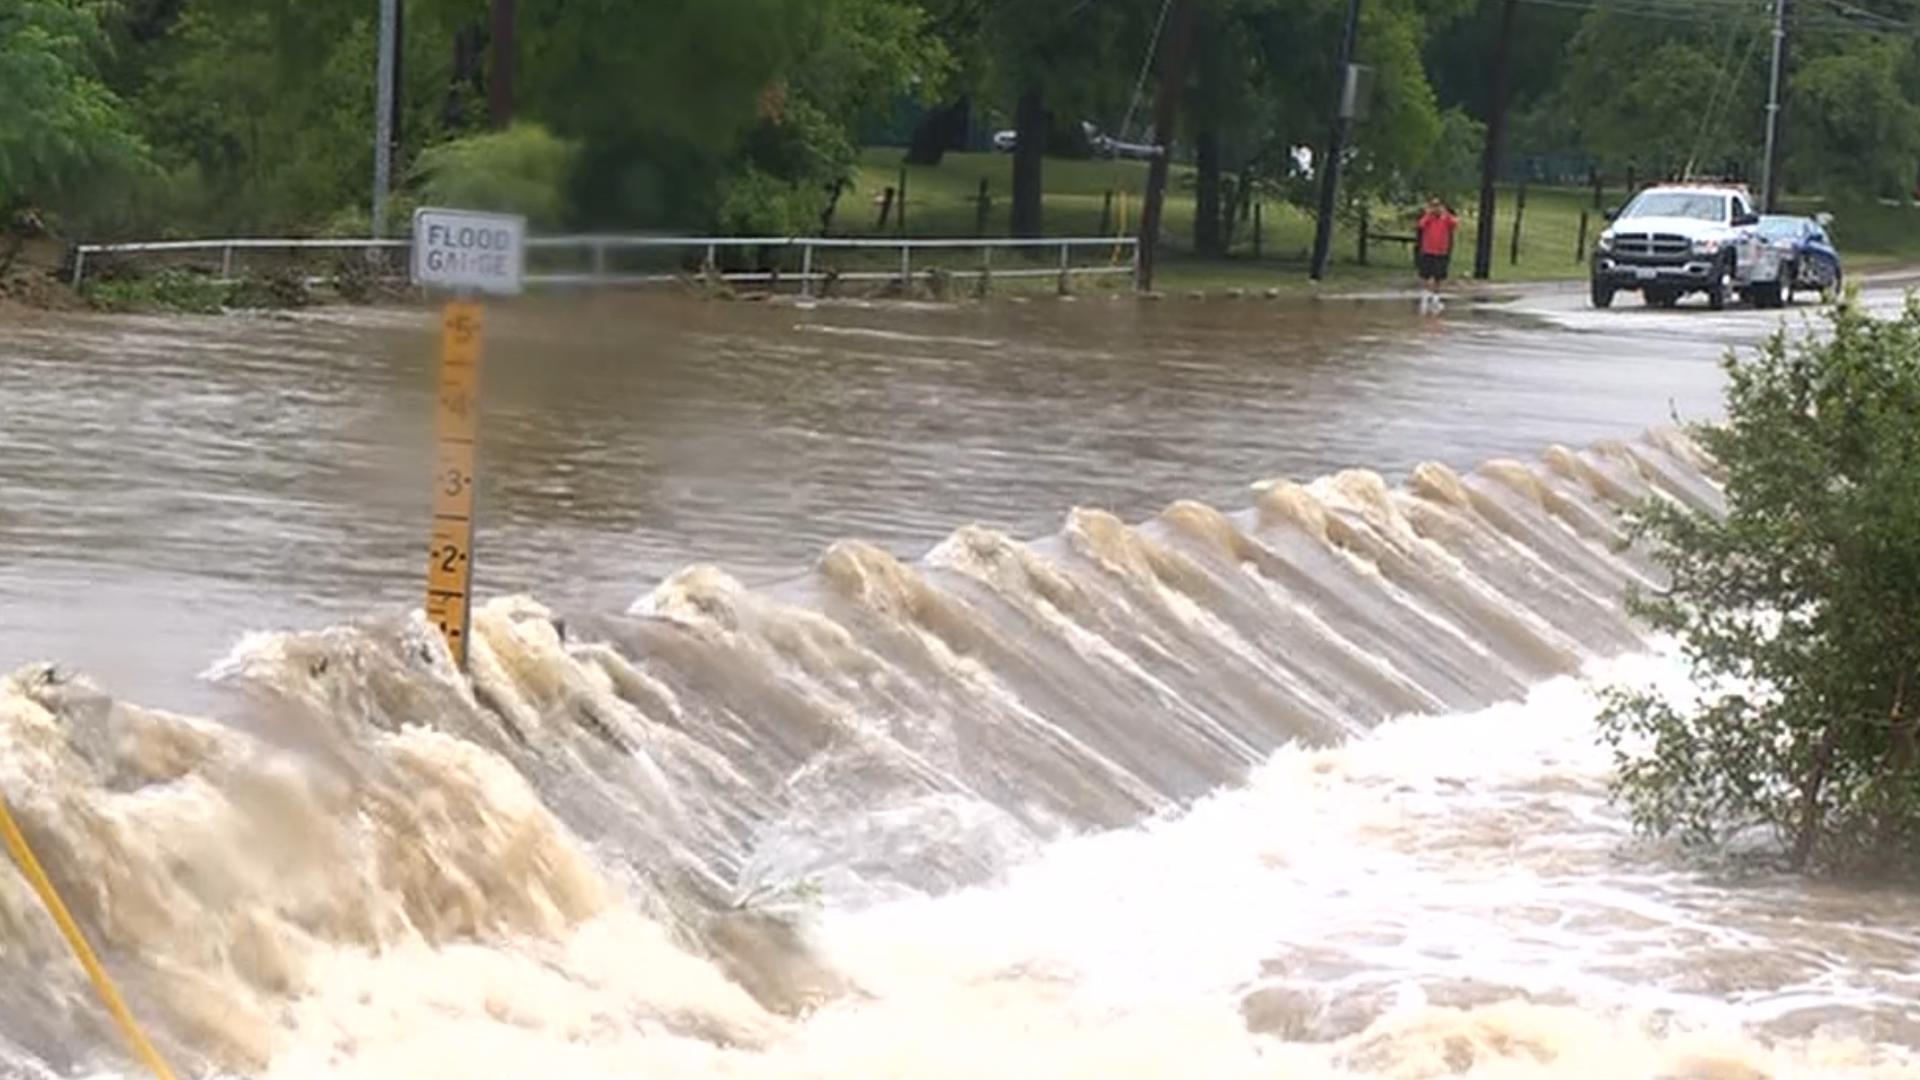 Take a look back at the Memorial Day Flood of 2013.